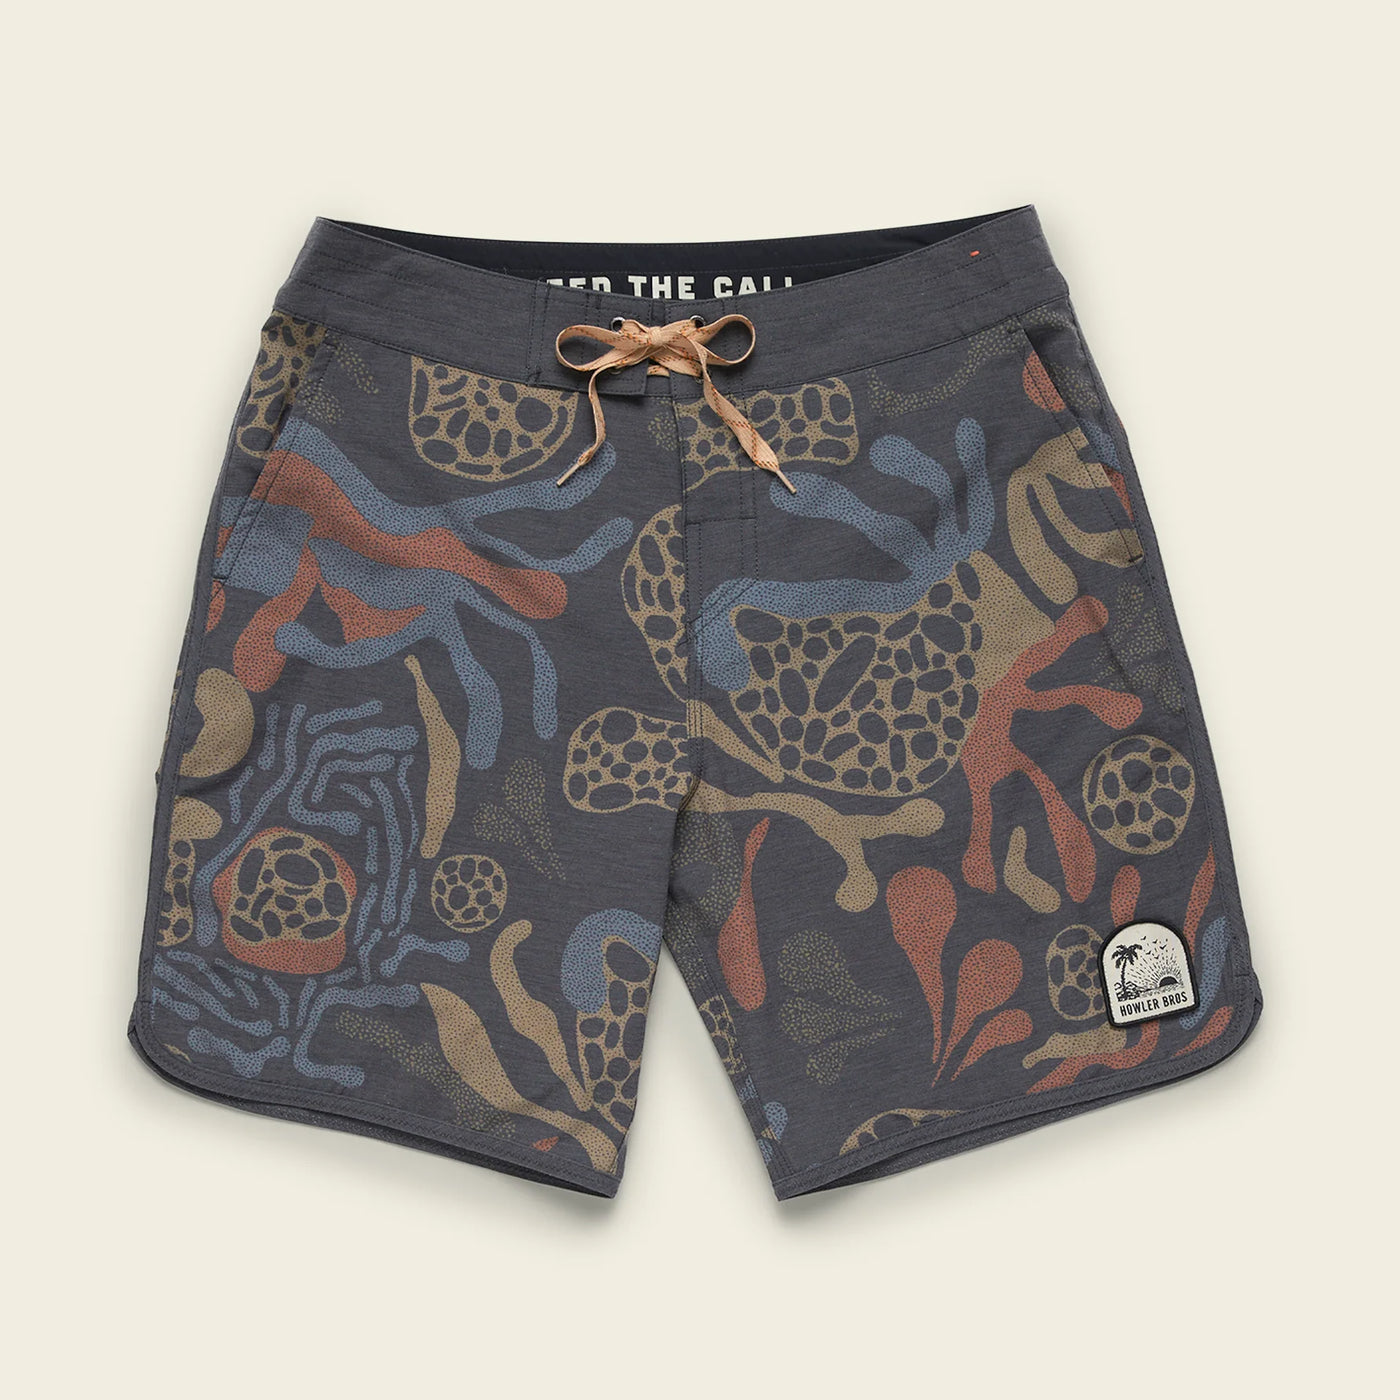 Howler Brothers Stretch Bruja Boardshorts SALE Now 40% Off!